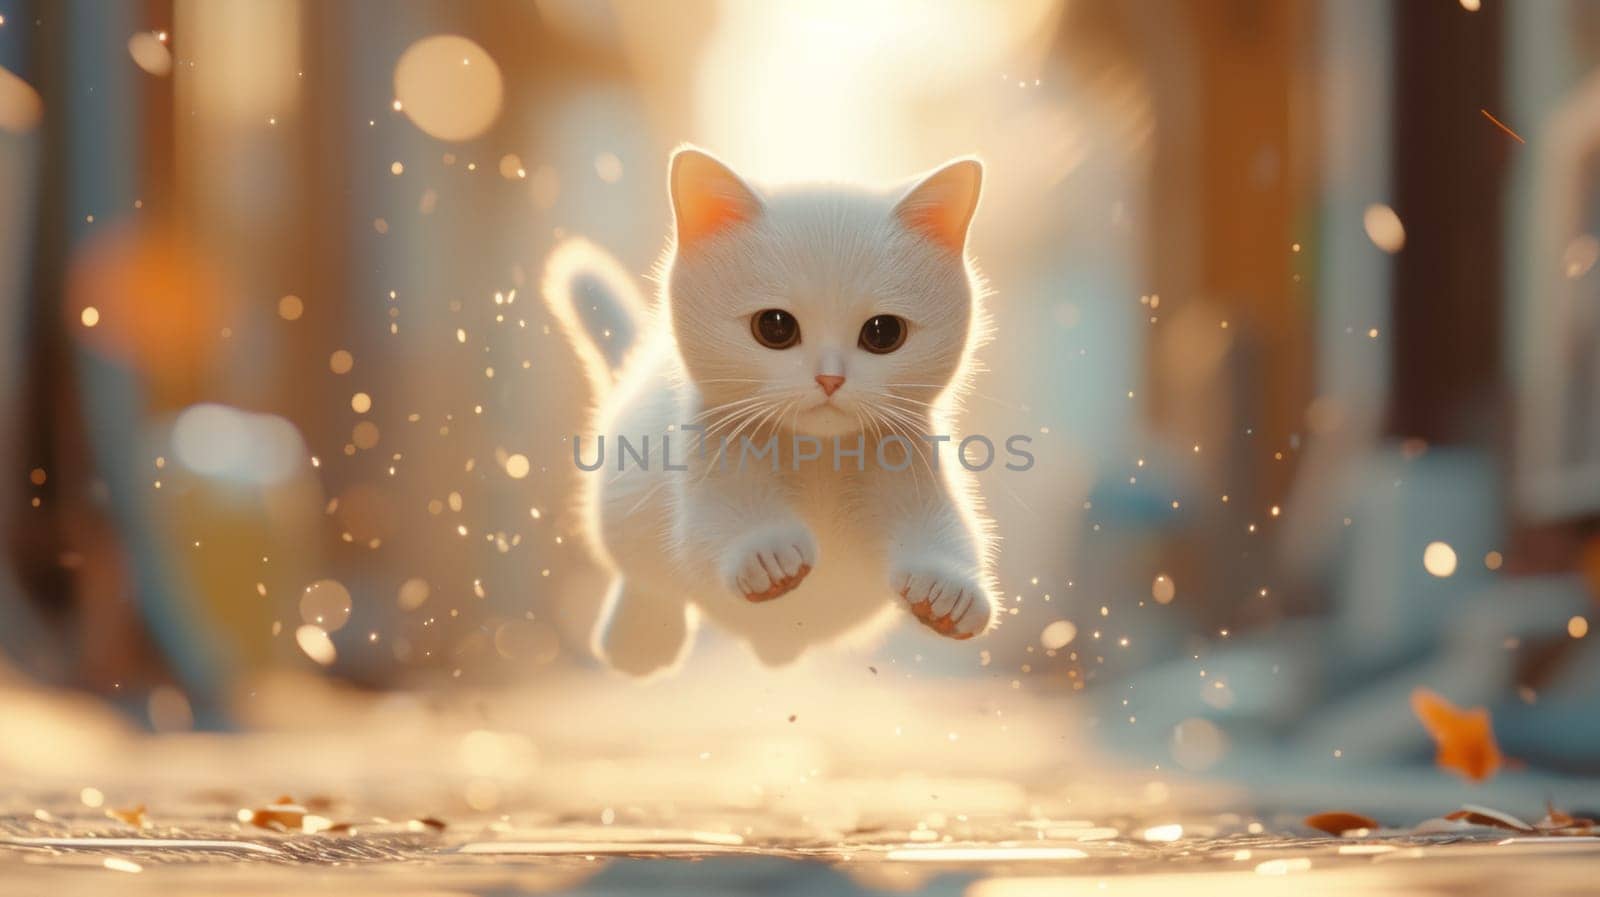 A white cat running on a sidewalk with leaves and dirt